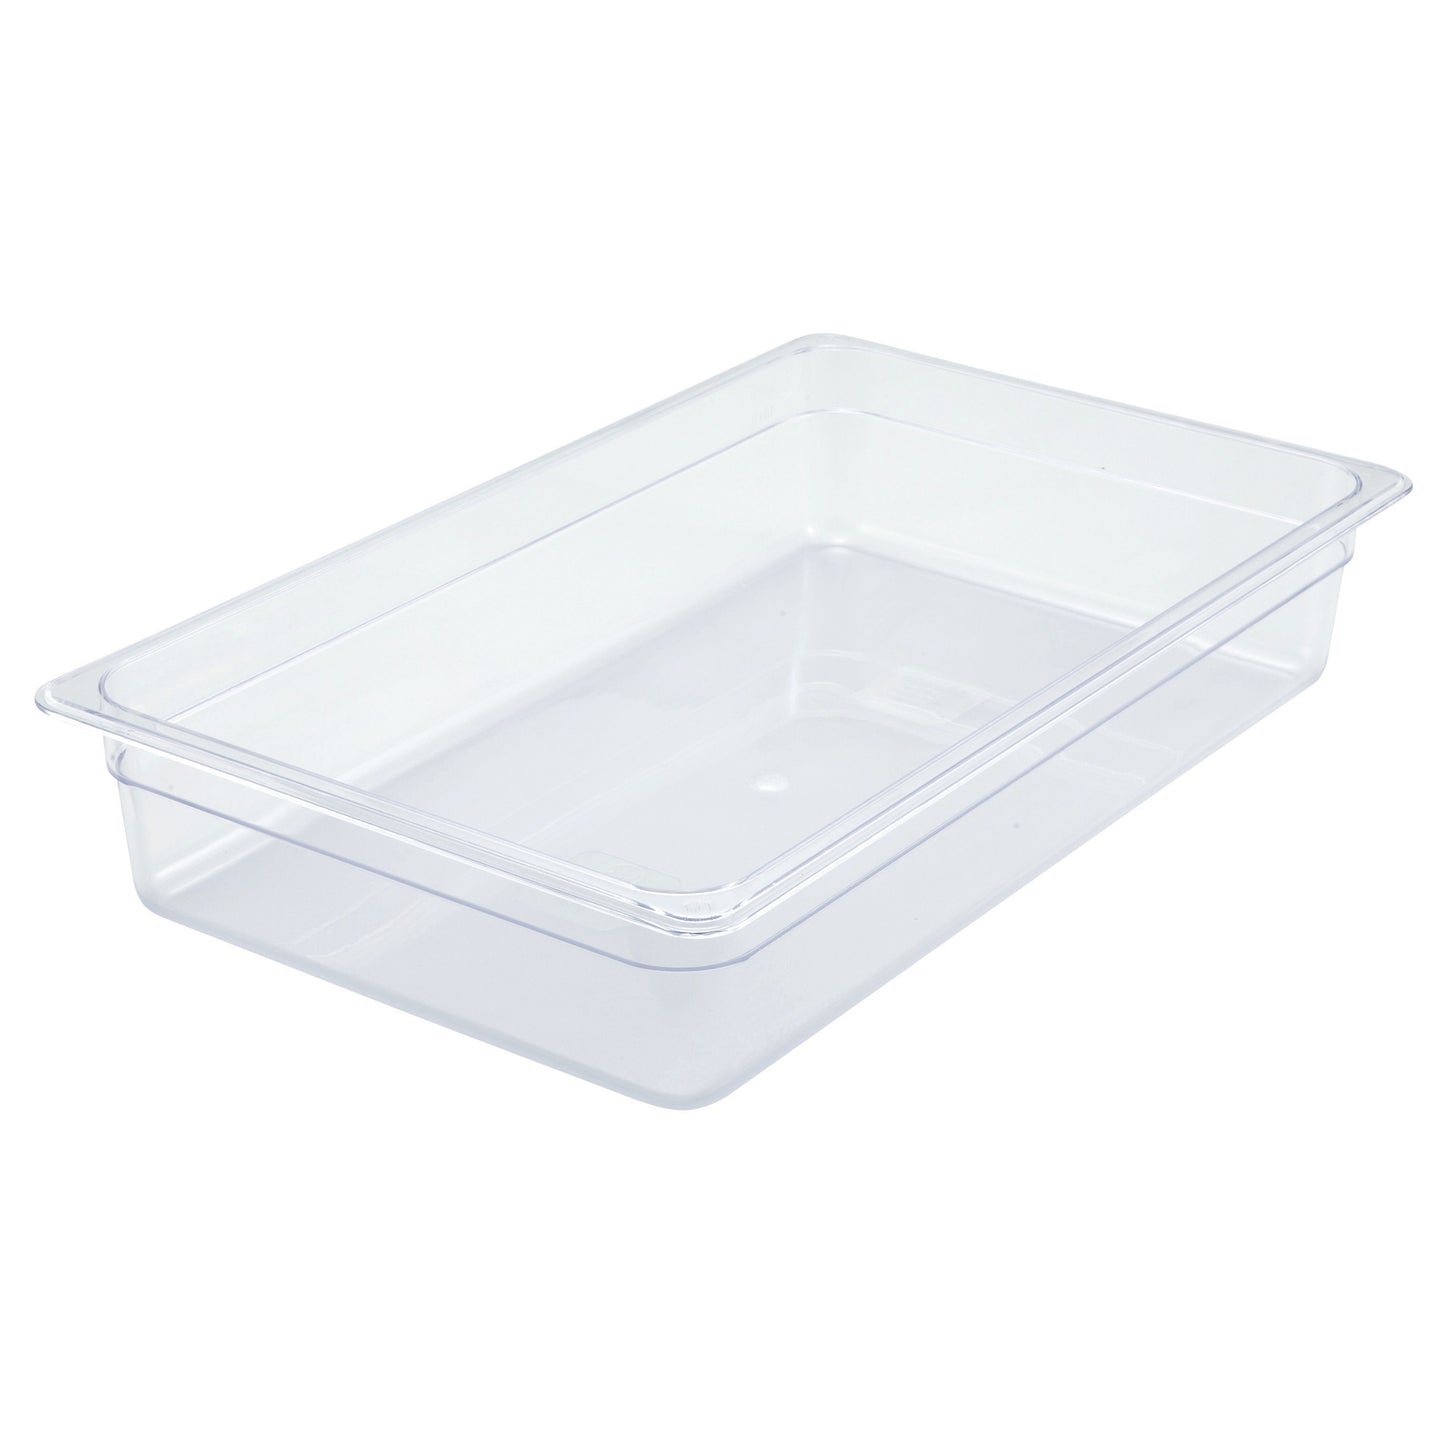 SP7104 - Polycarbonate Food Pan, Full-Size - 3-1/2"